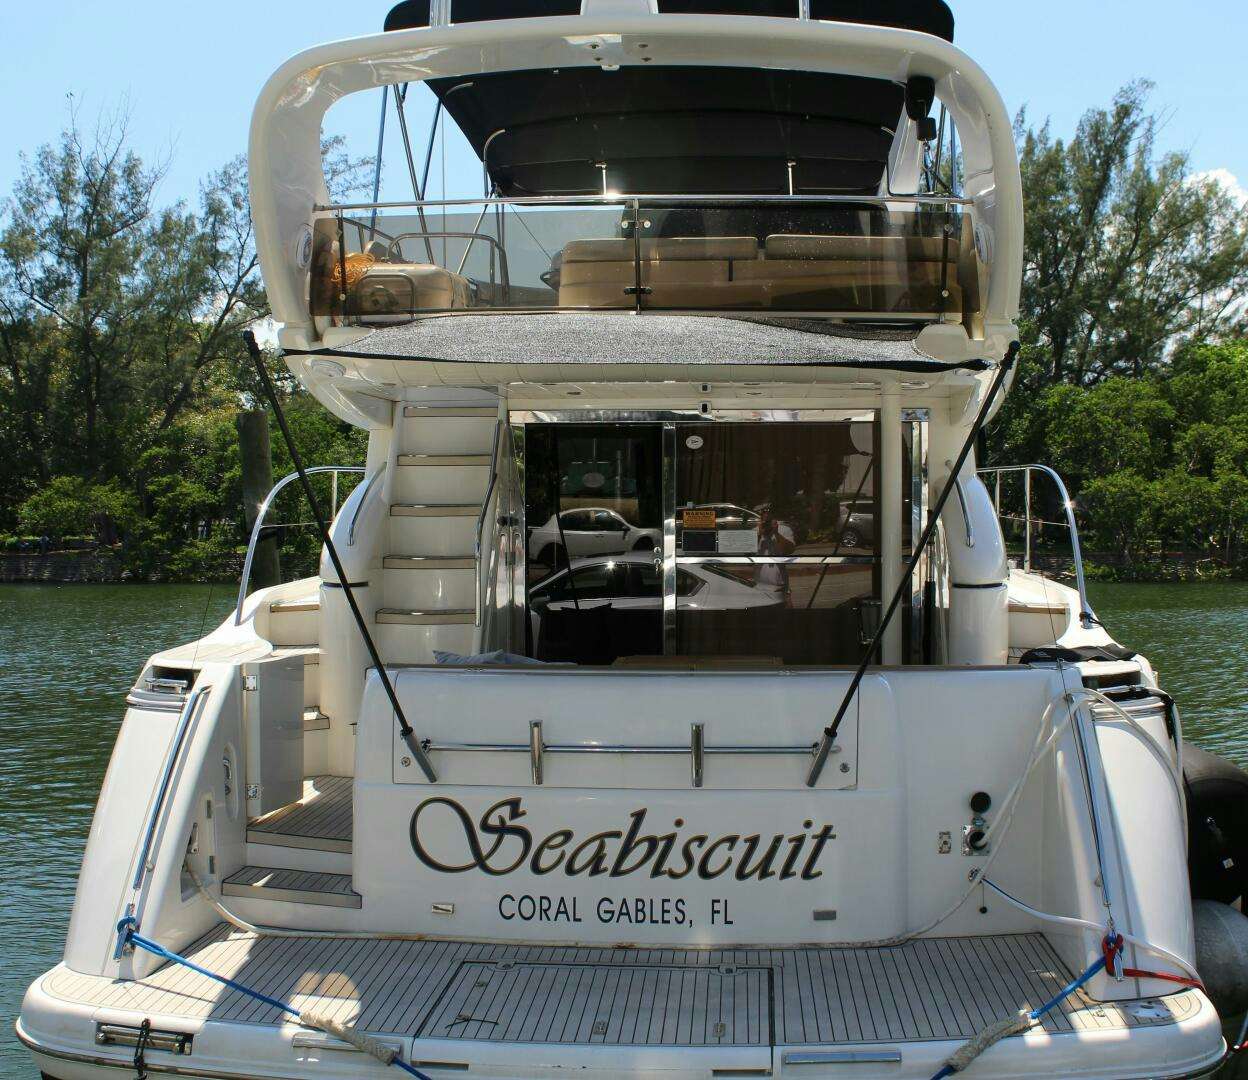 Seabiscuit
Yacht for Sale